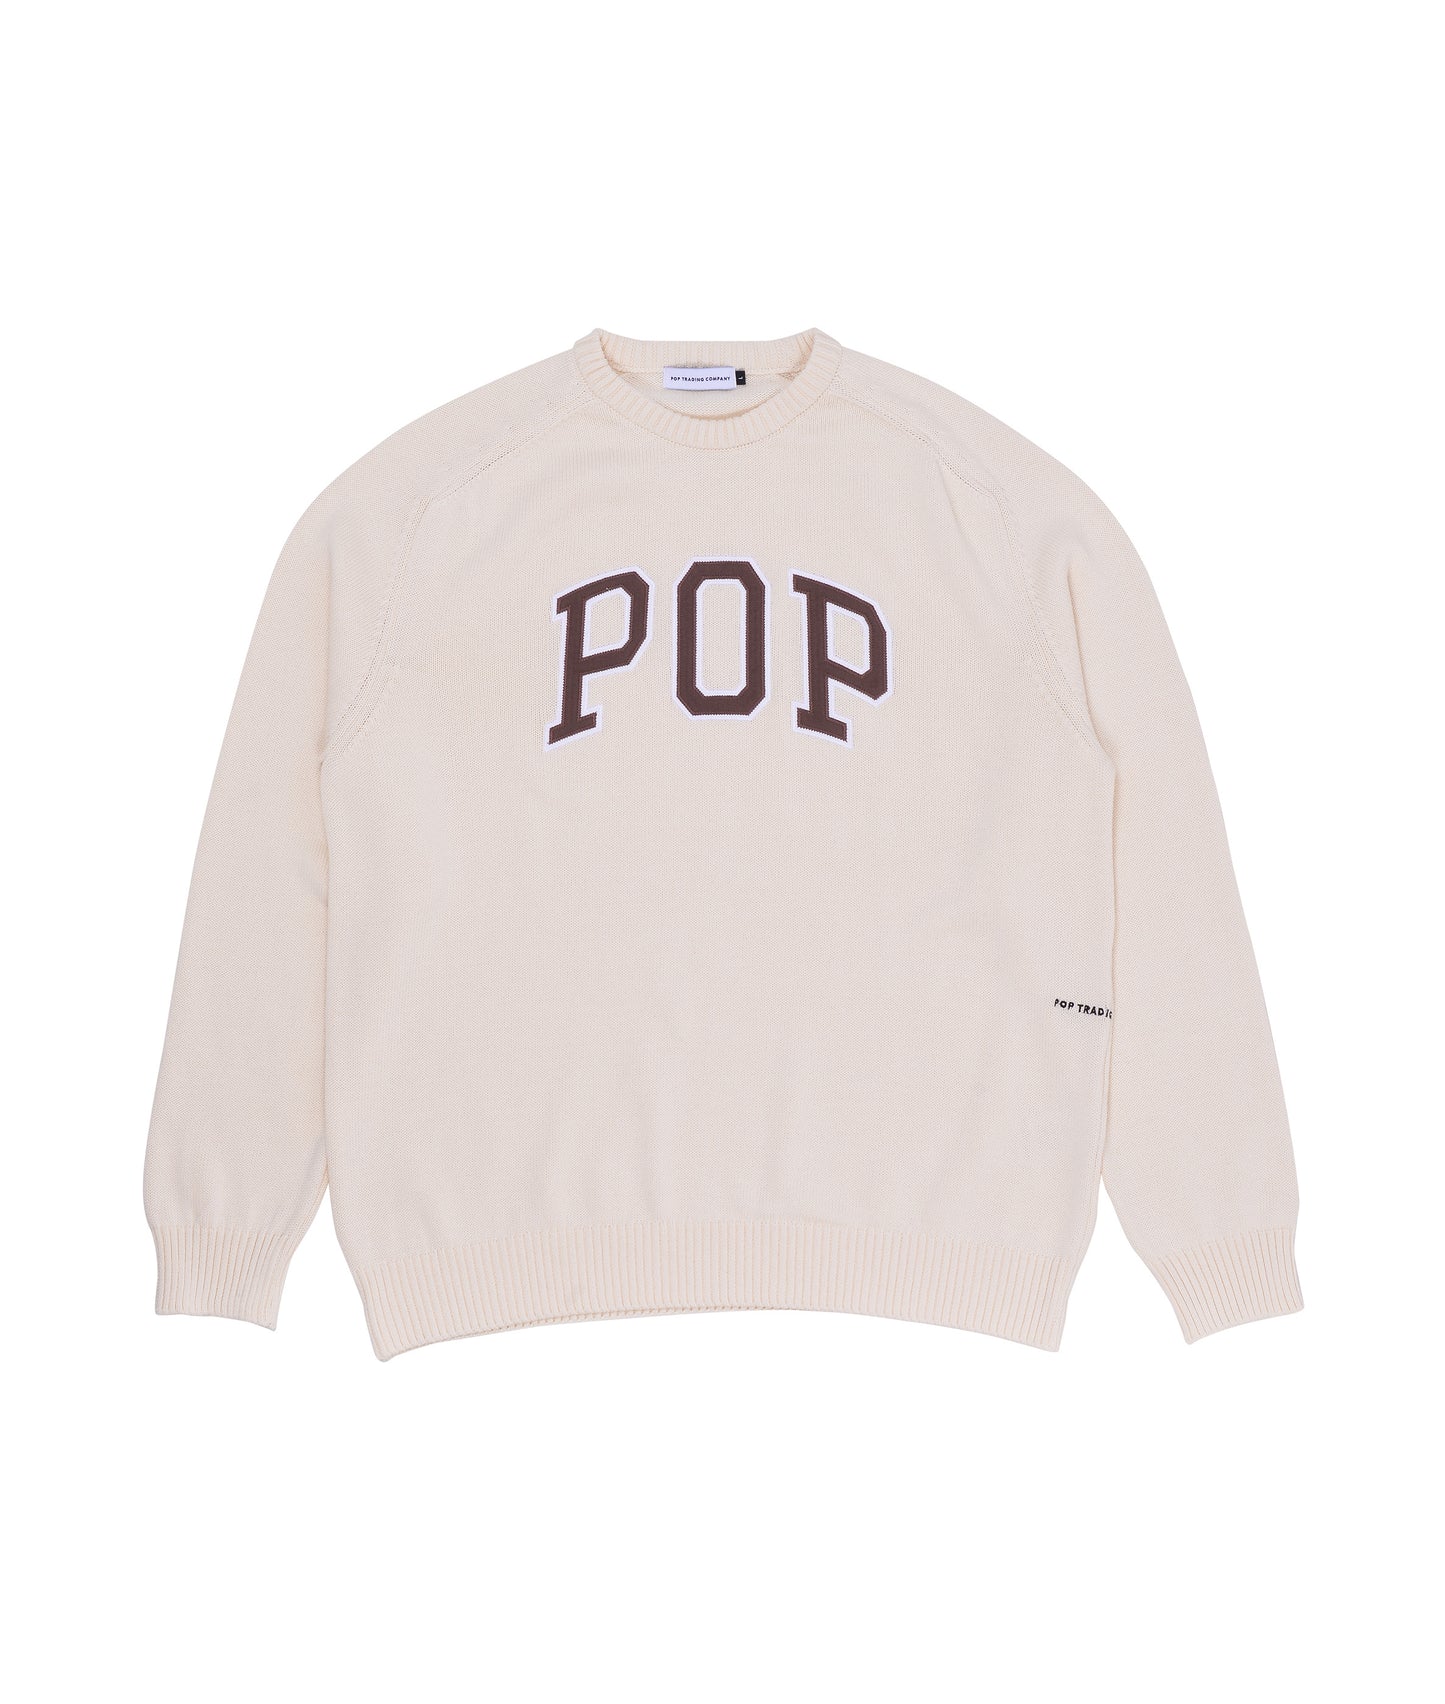 POP Arch Knitted Crewneck Sweater Offwhite